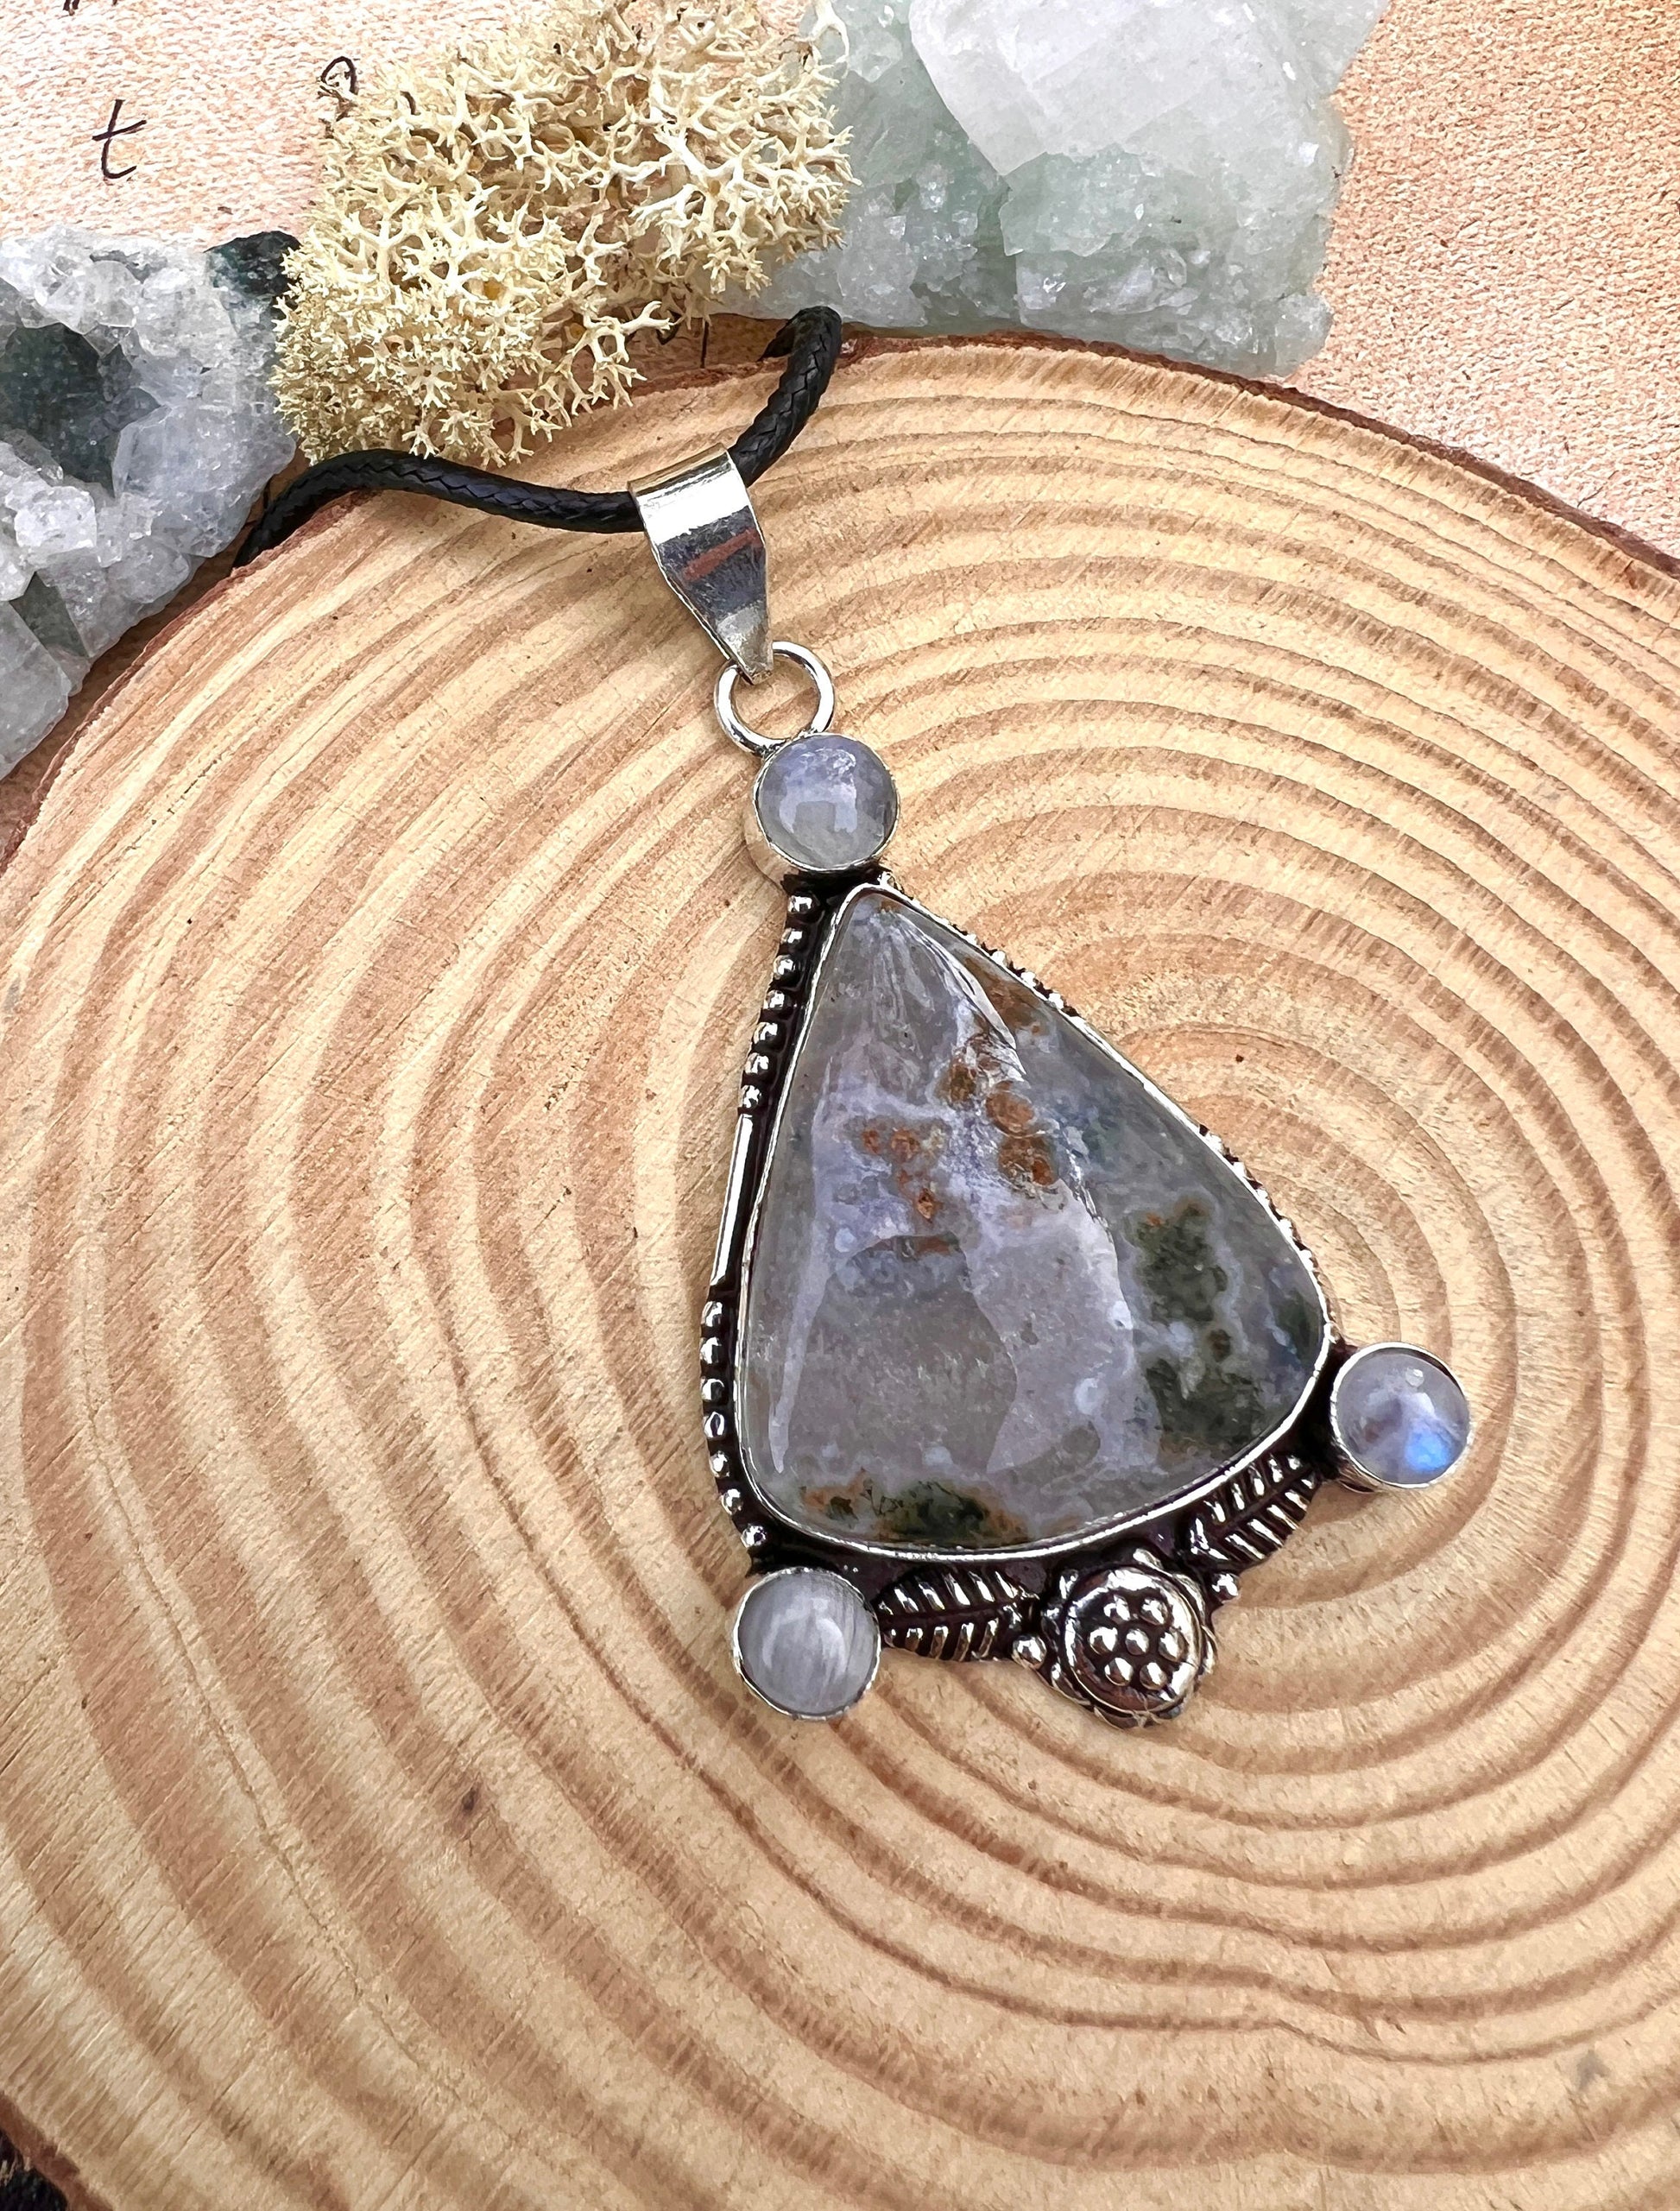 Moss Agate And Moonstone Pendant In Sterling Silver Boho Gemstone Pendant One Of A Kind Jewelry Unique Gift